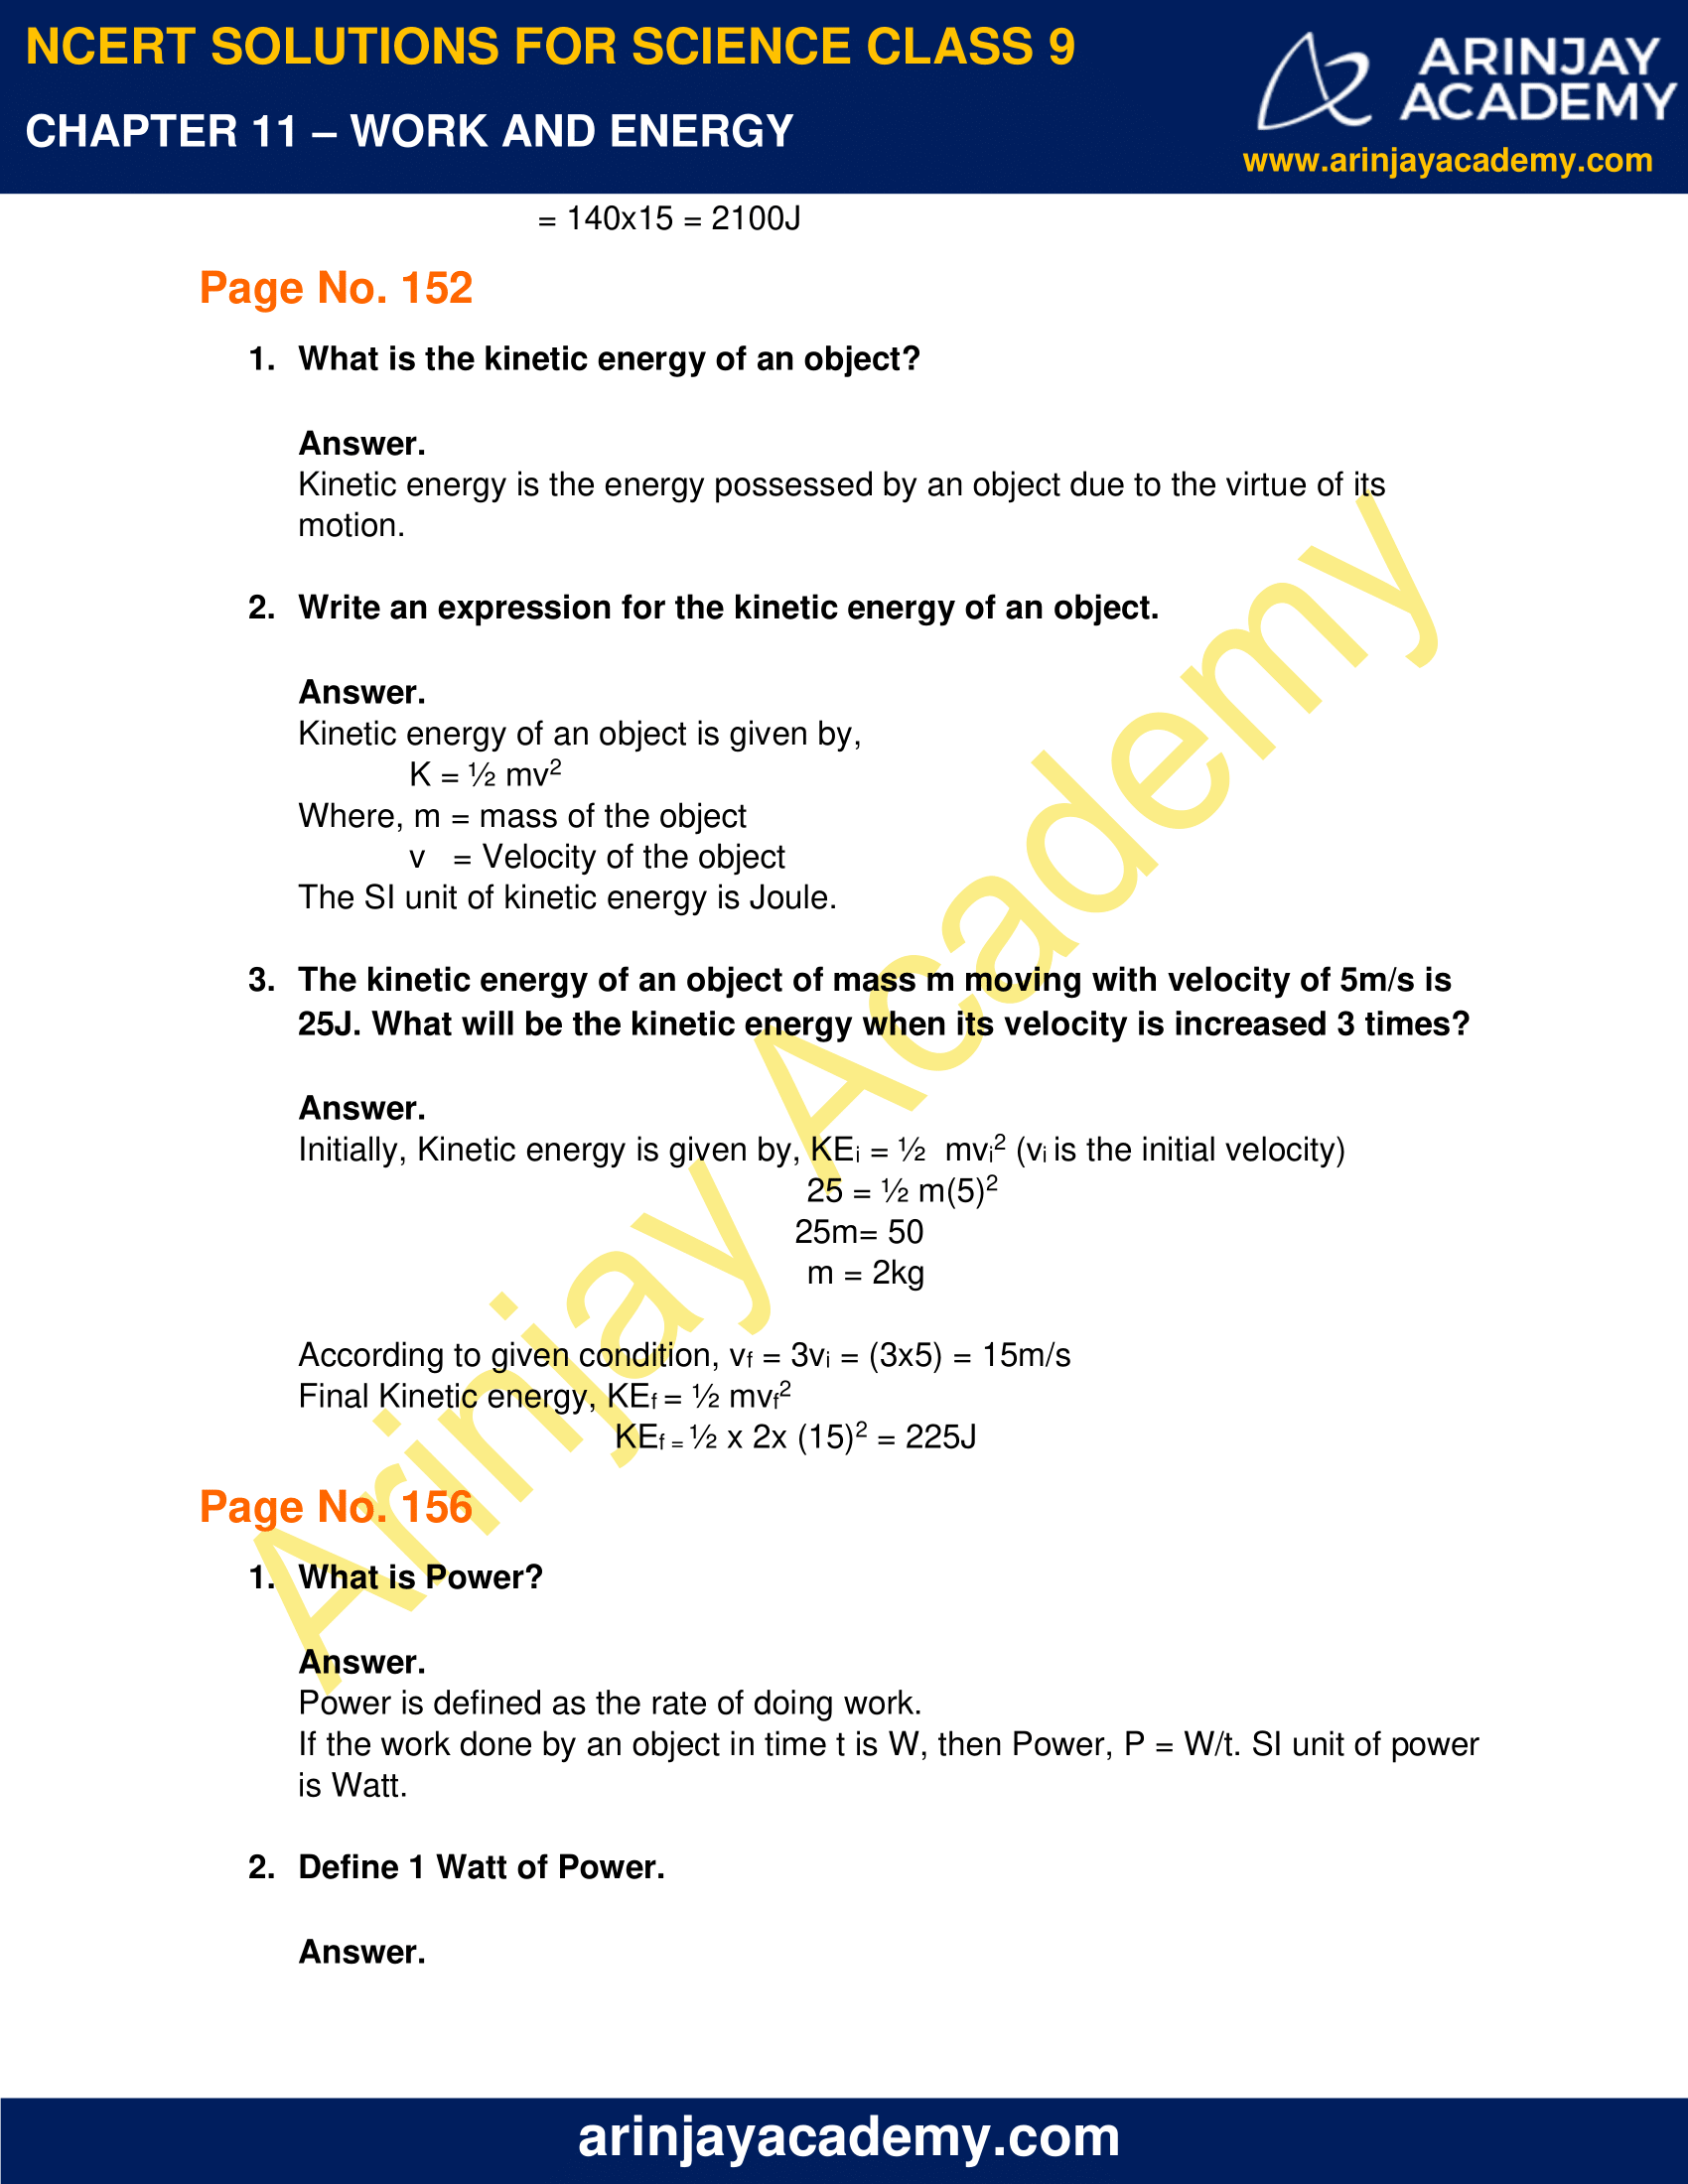 assignment on work and energy class 9